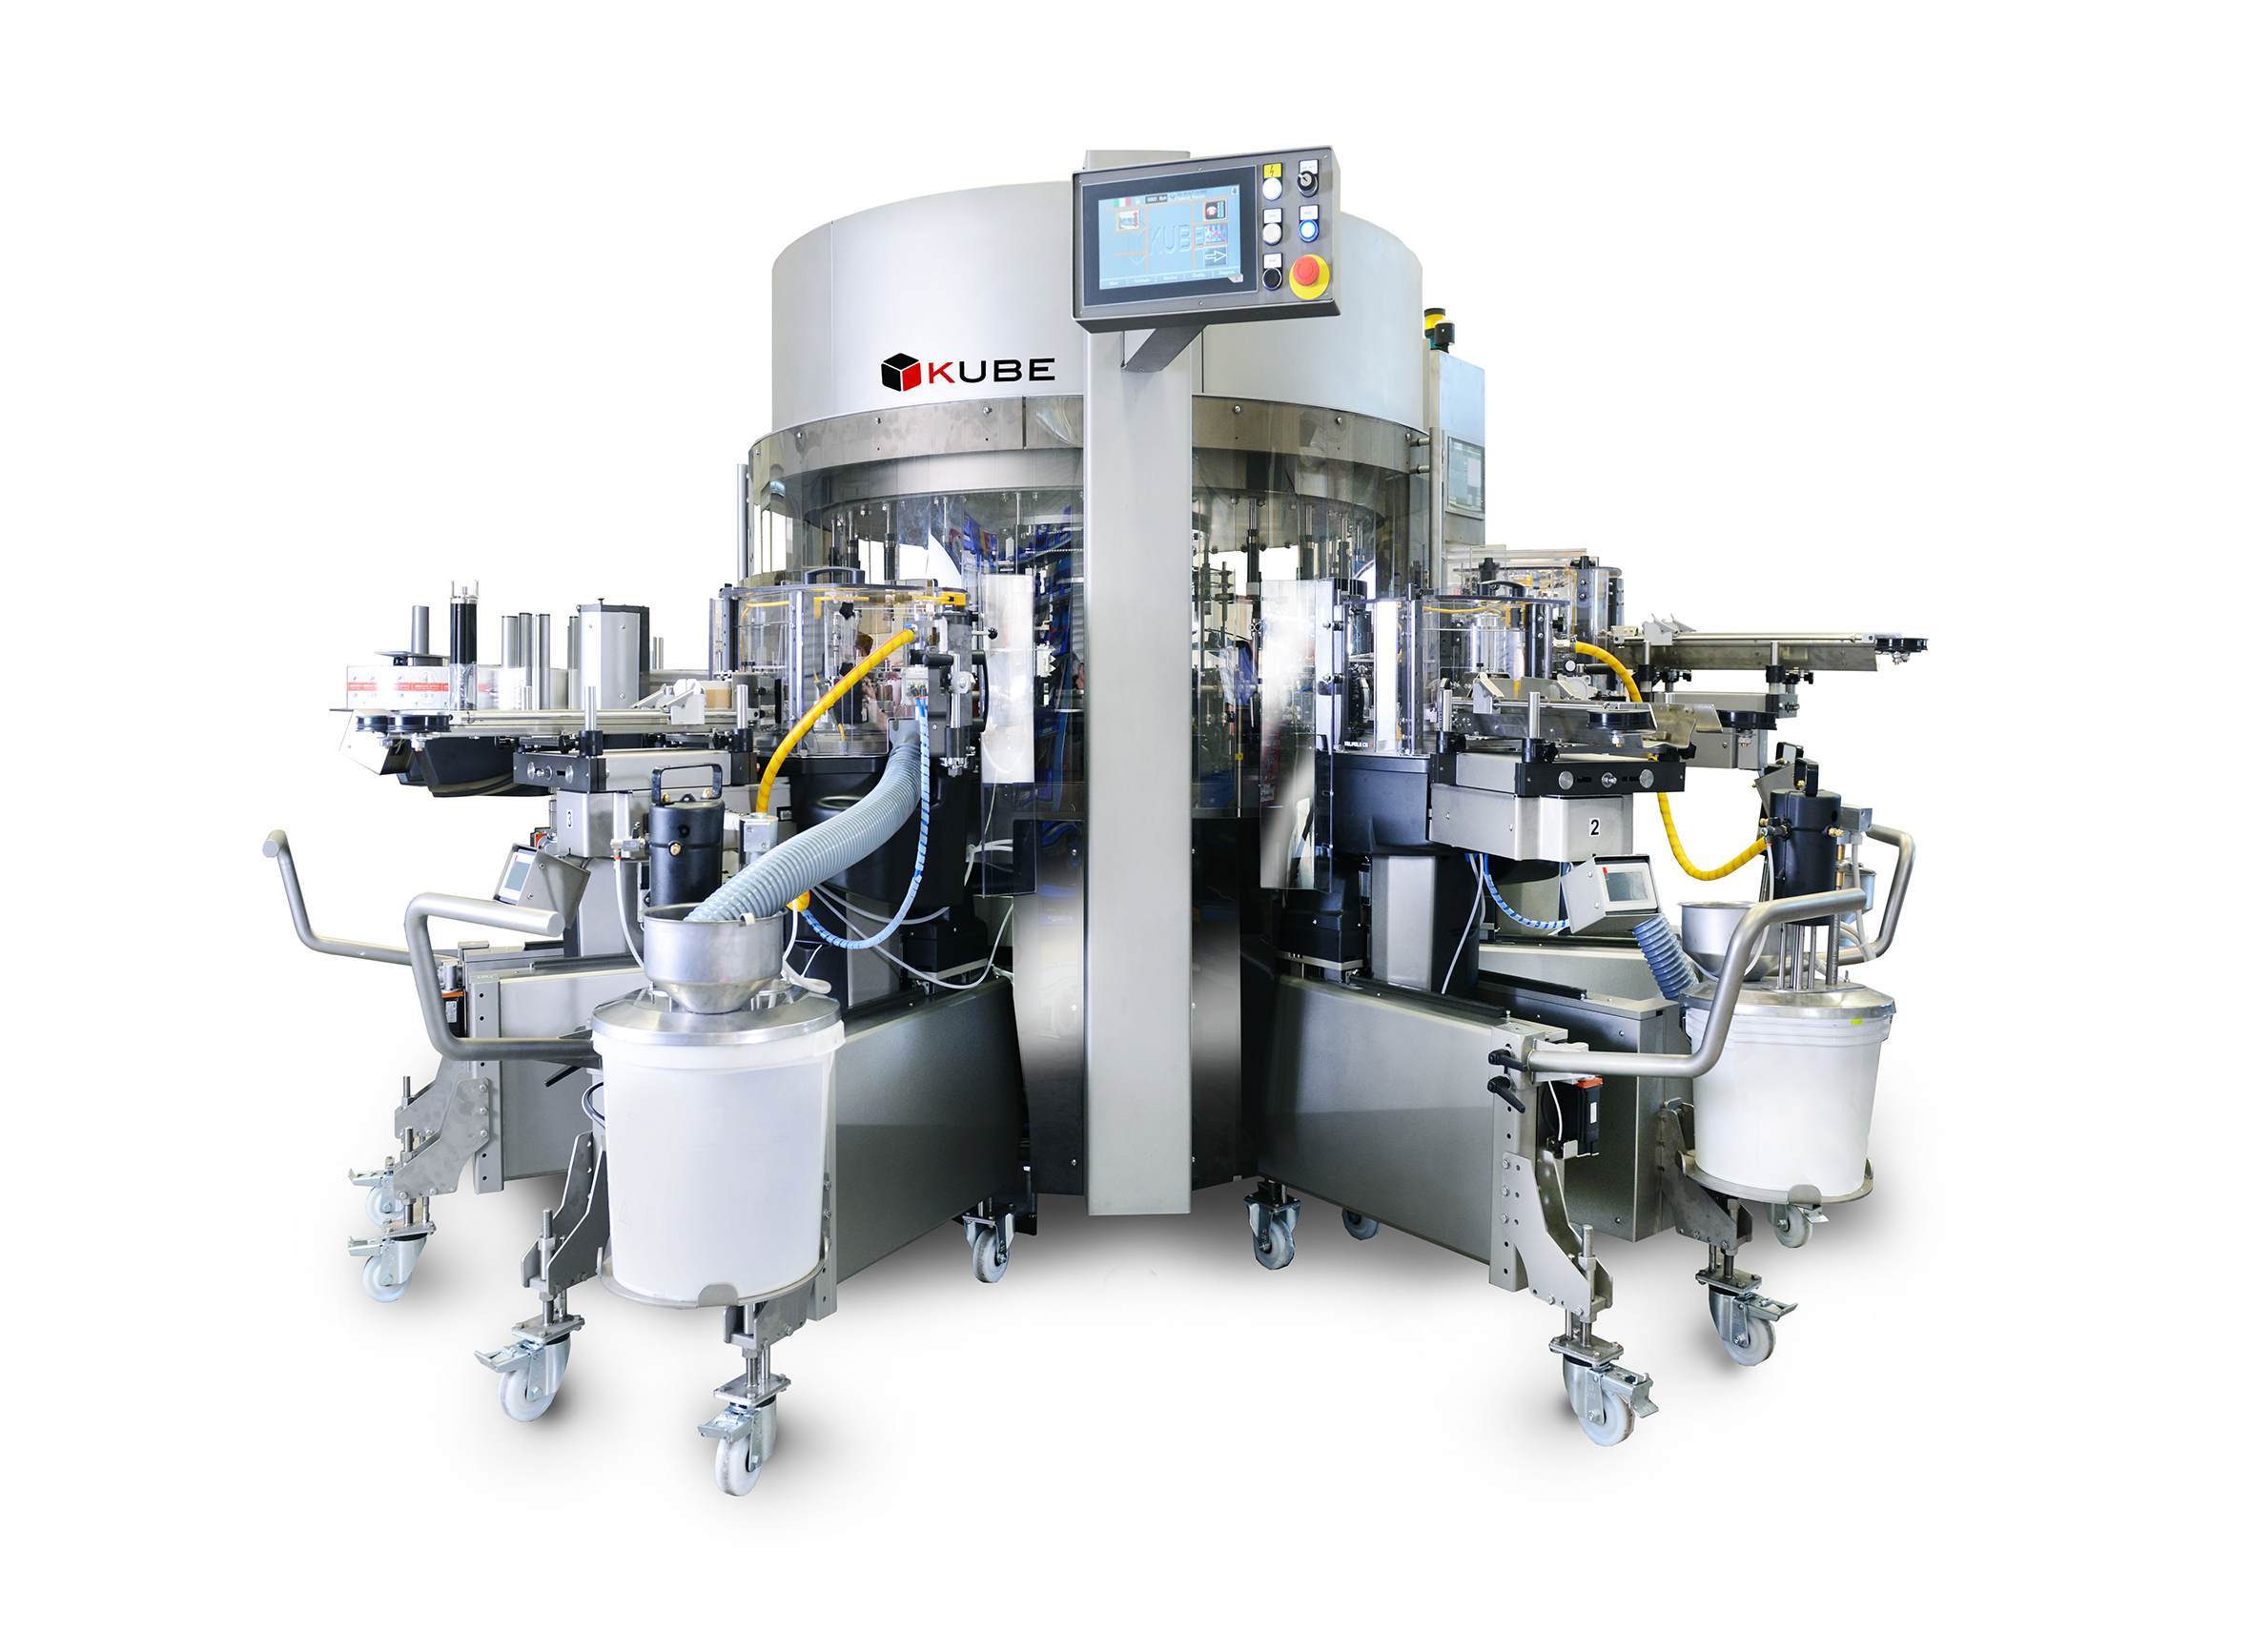 Flexible, modular Sacmi labelling solutions to be showcased at Pack Expo, Chicago